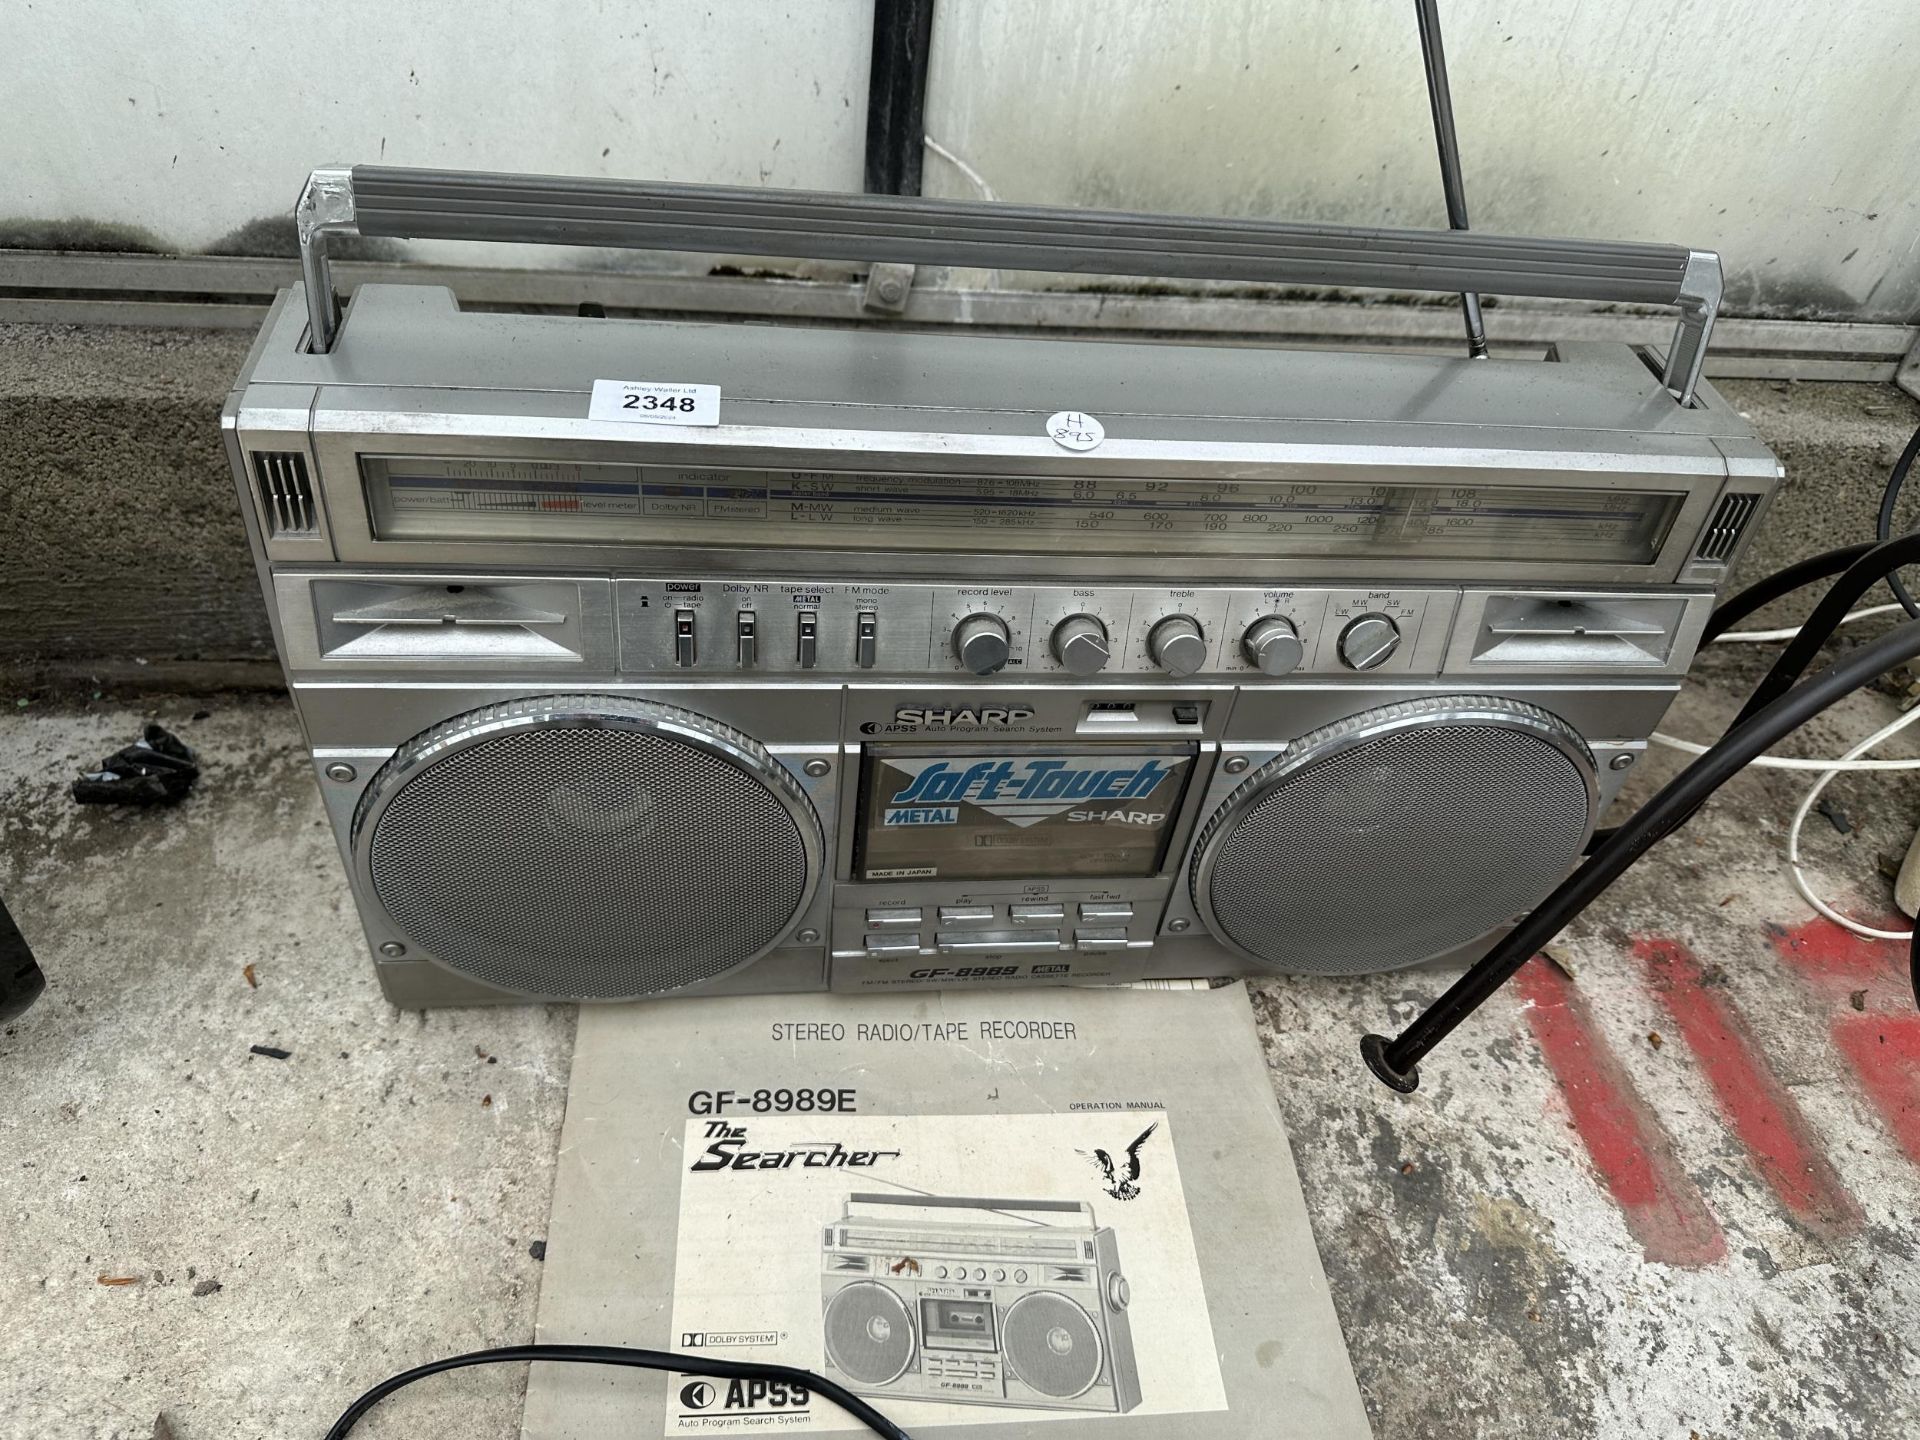 A RETRO SHARP RADIO/TAPE RECORDER AND A FURTHER DIGITECH RADIO - Image 3 of 3